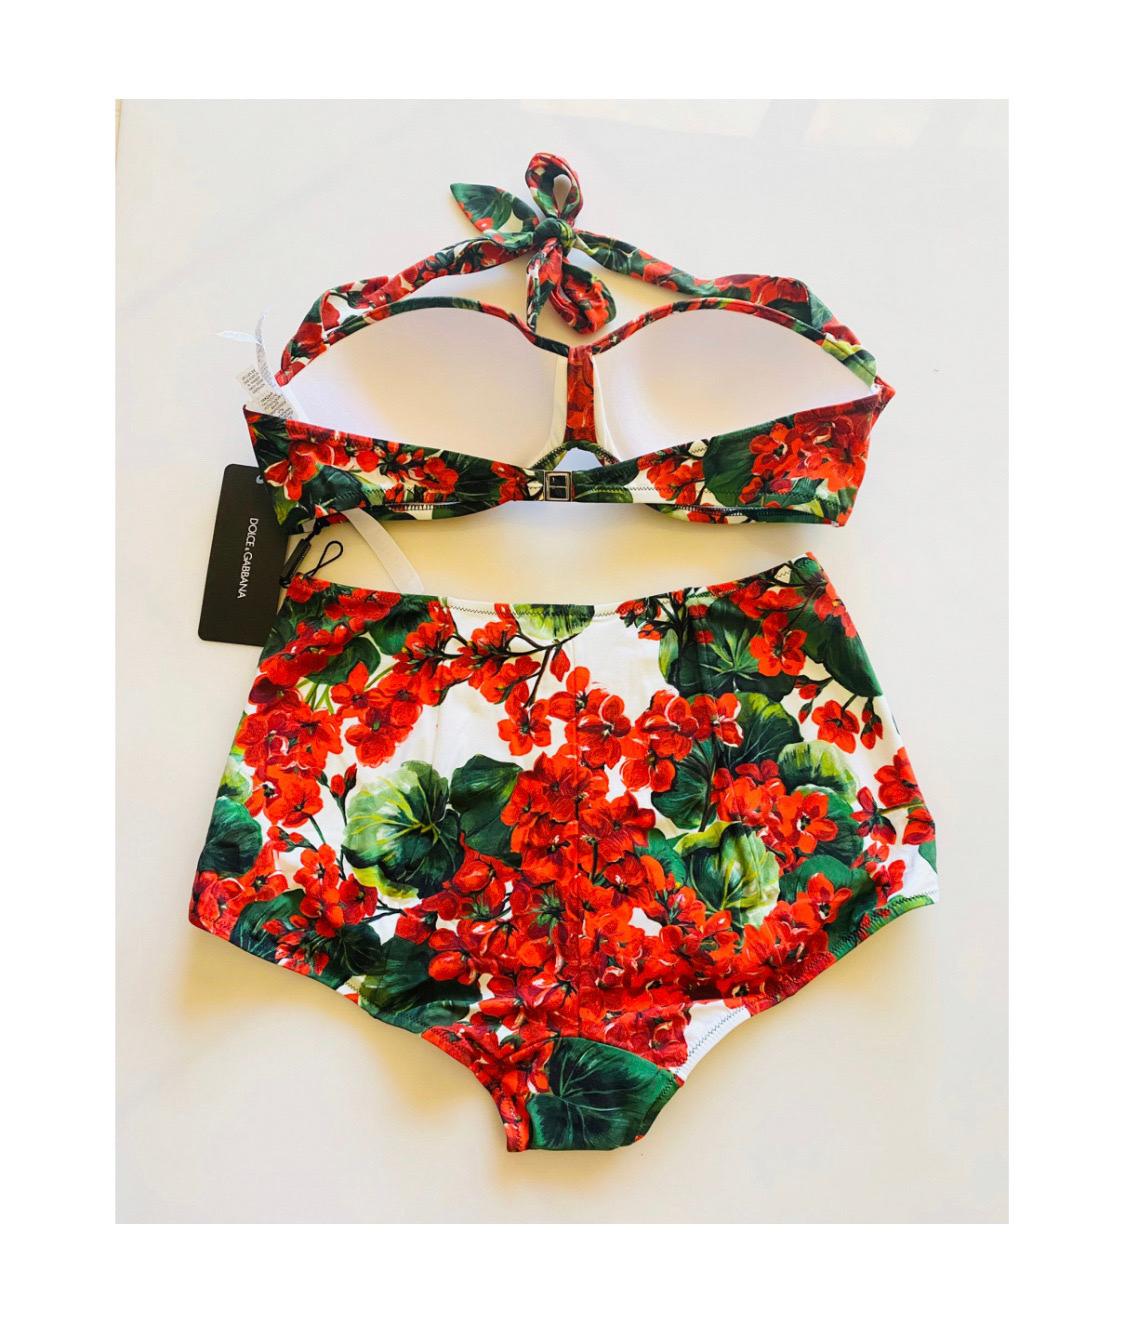 Dolce & Gabbana romantic retro
bandeau bikini top offers a
sophisticated look thanks to the RED
GERANIUM print and is made of the
precious “sensitive fabric”. The shaped
Cups guarantee structure and support.
The bikini bottom with a high